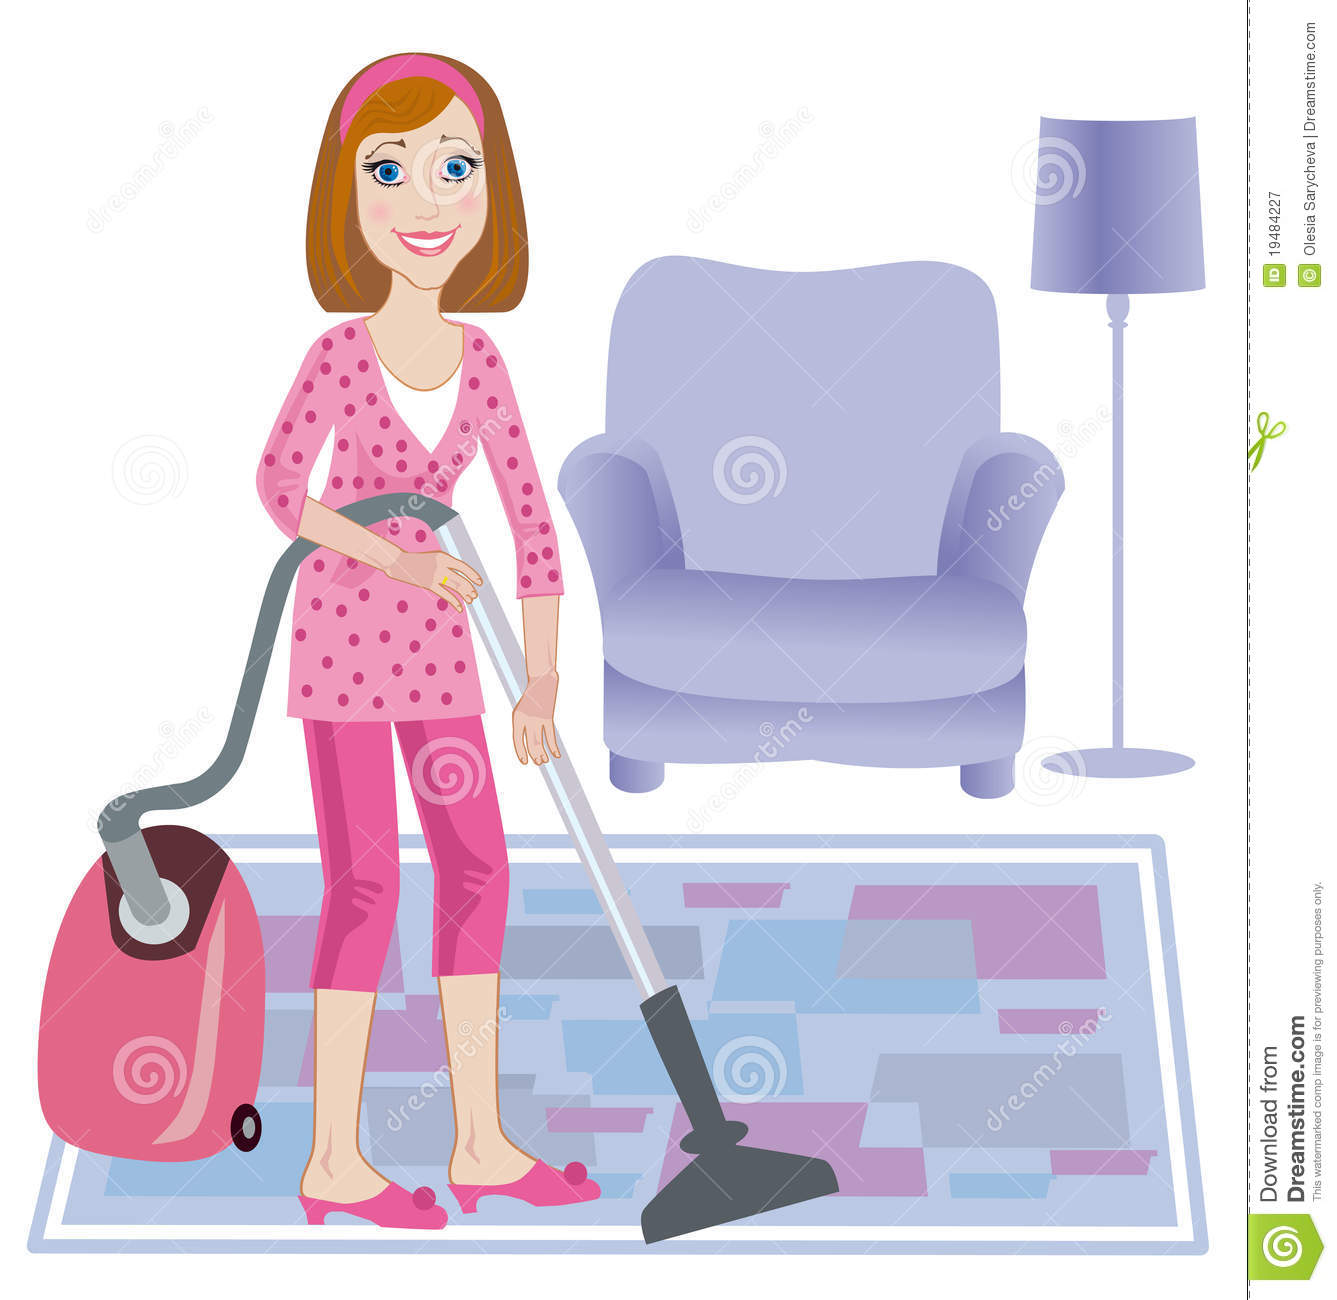 Cleaning Up Of Room Royalty Free Stock Photography   Image  19484227